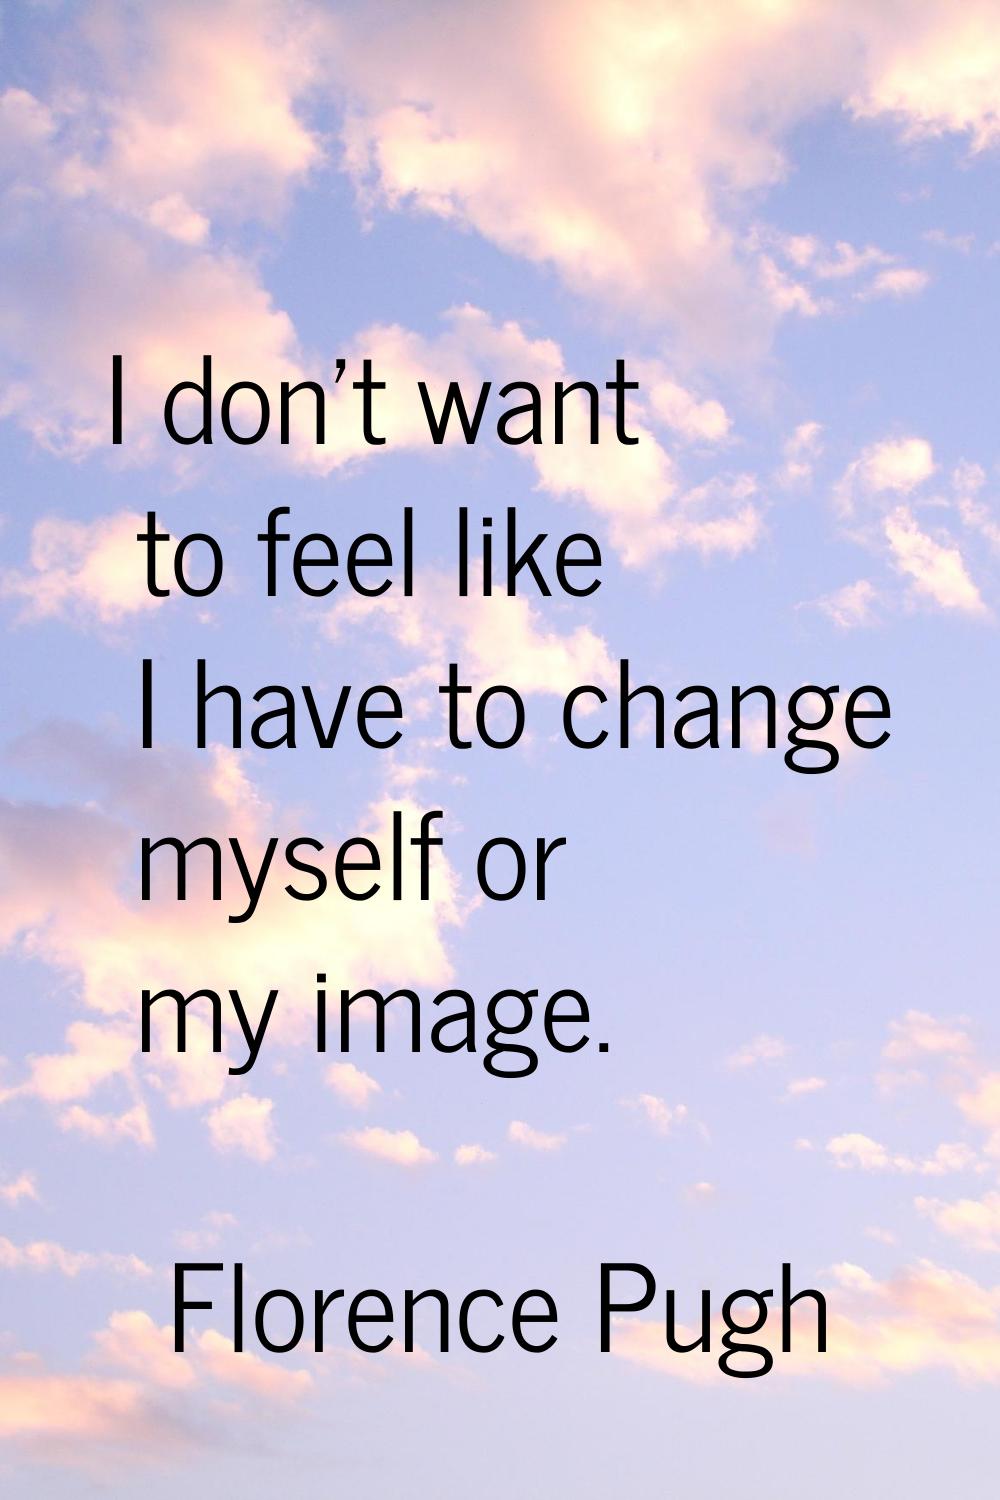 I don't want to feel like I have to change myself or my image.